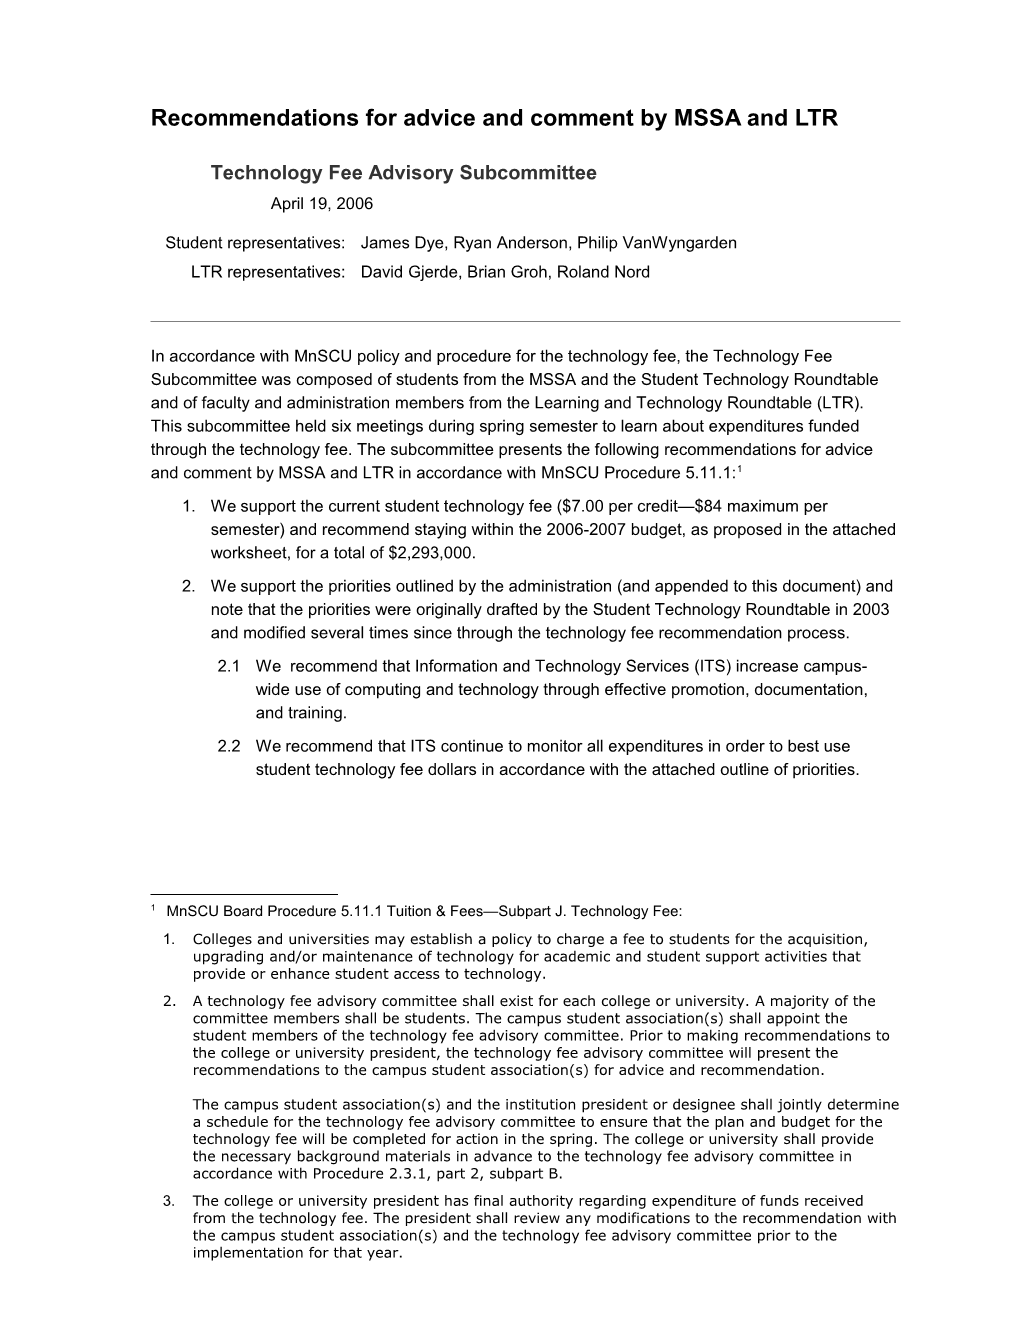 Technology Fee Subcommittee Recommendations